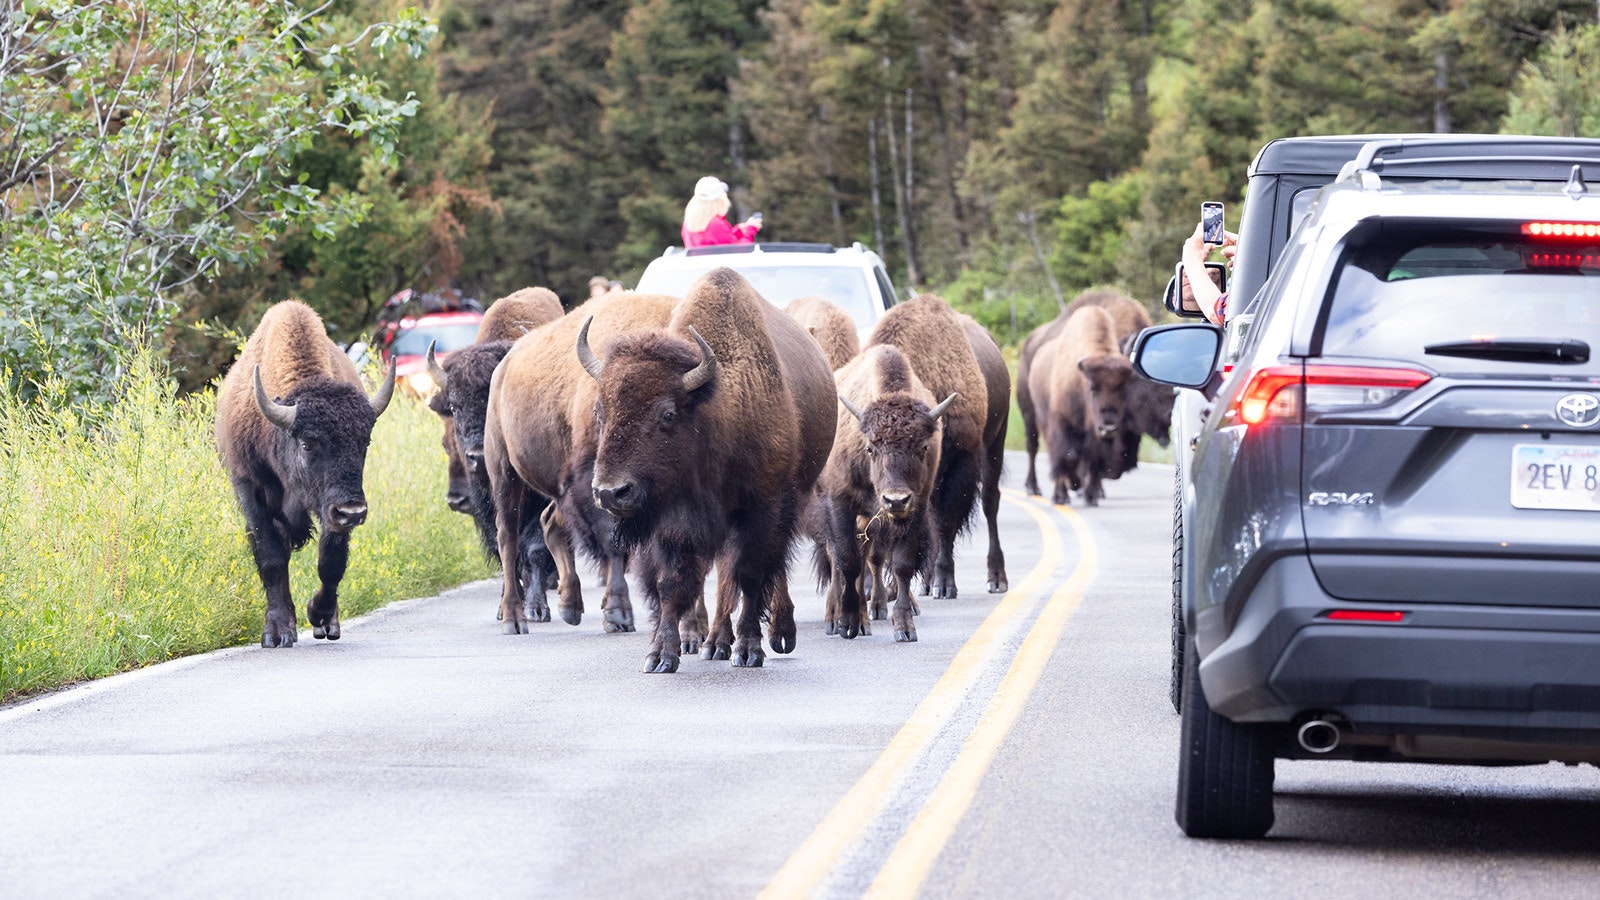 Bison on a road in Yellowstone National Park during the rut brings traffic to a halt.